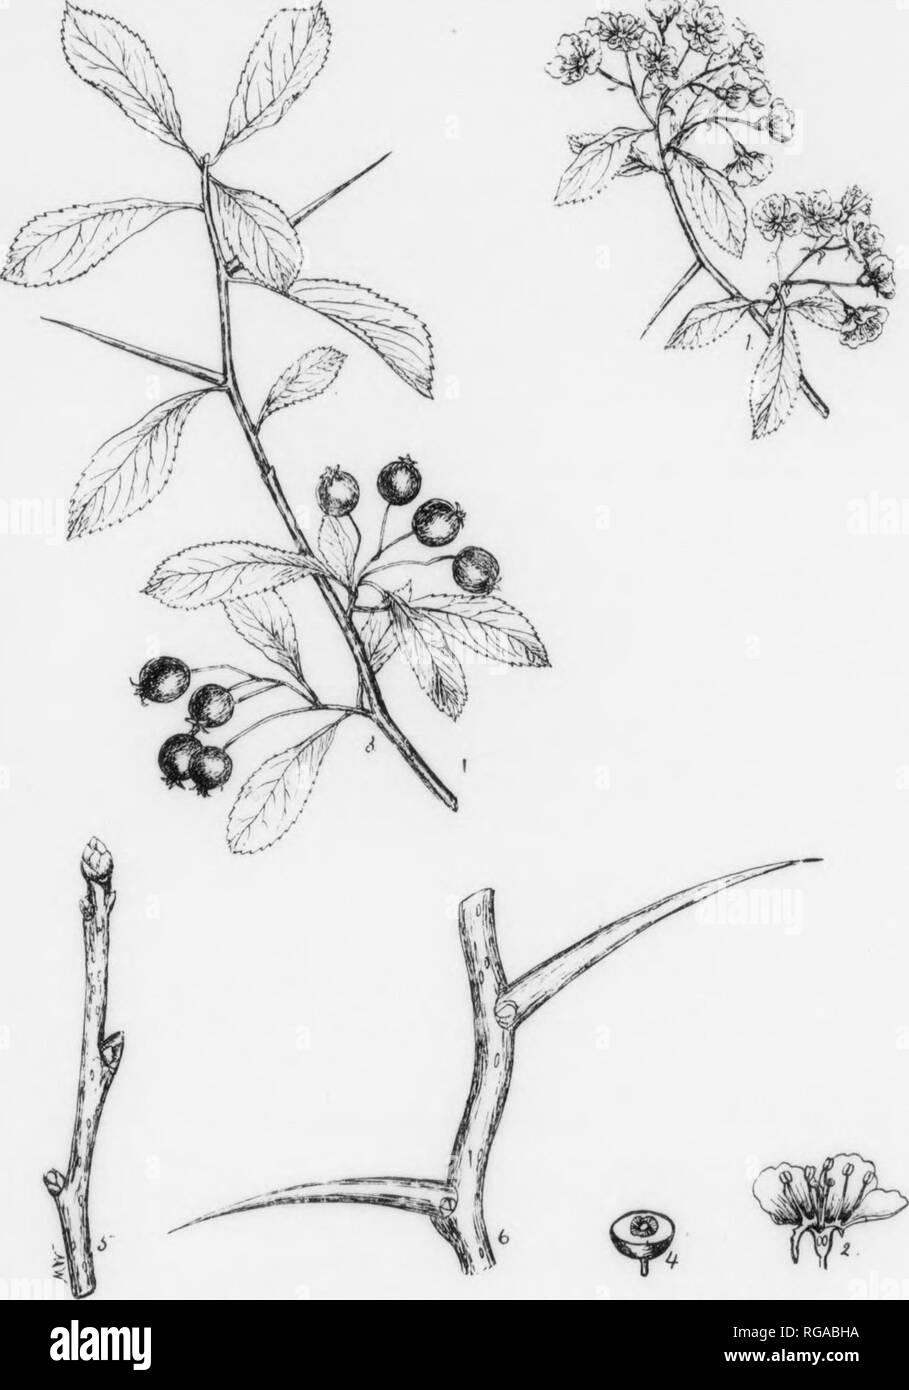 . Bulletin (Pennsylvania Department of Forestry), no. 11. Forests and forestry. 170 COCKSPUR THORN. Crataegus Crus-galli, Linnaeus. GENUS DESCRIPTIONâThe genus Crataegus has the center of Its distribution in eastern North America. It renohes Its best development in the great limestone formations rather common in this part of America. Prior to 1900 fewer than 75 species were known in the world of which numbor about 30 were native to North America. At the present time about 700 species of trees and shrubs belonging to this genus have been described. In the State of New York alone 218 spoclos hav Stock Photo